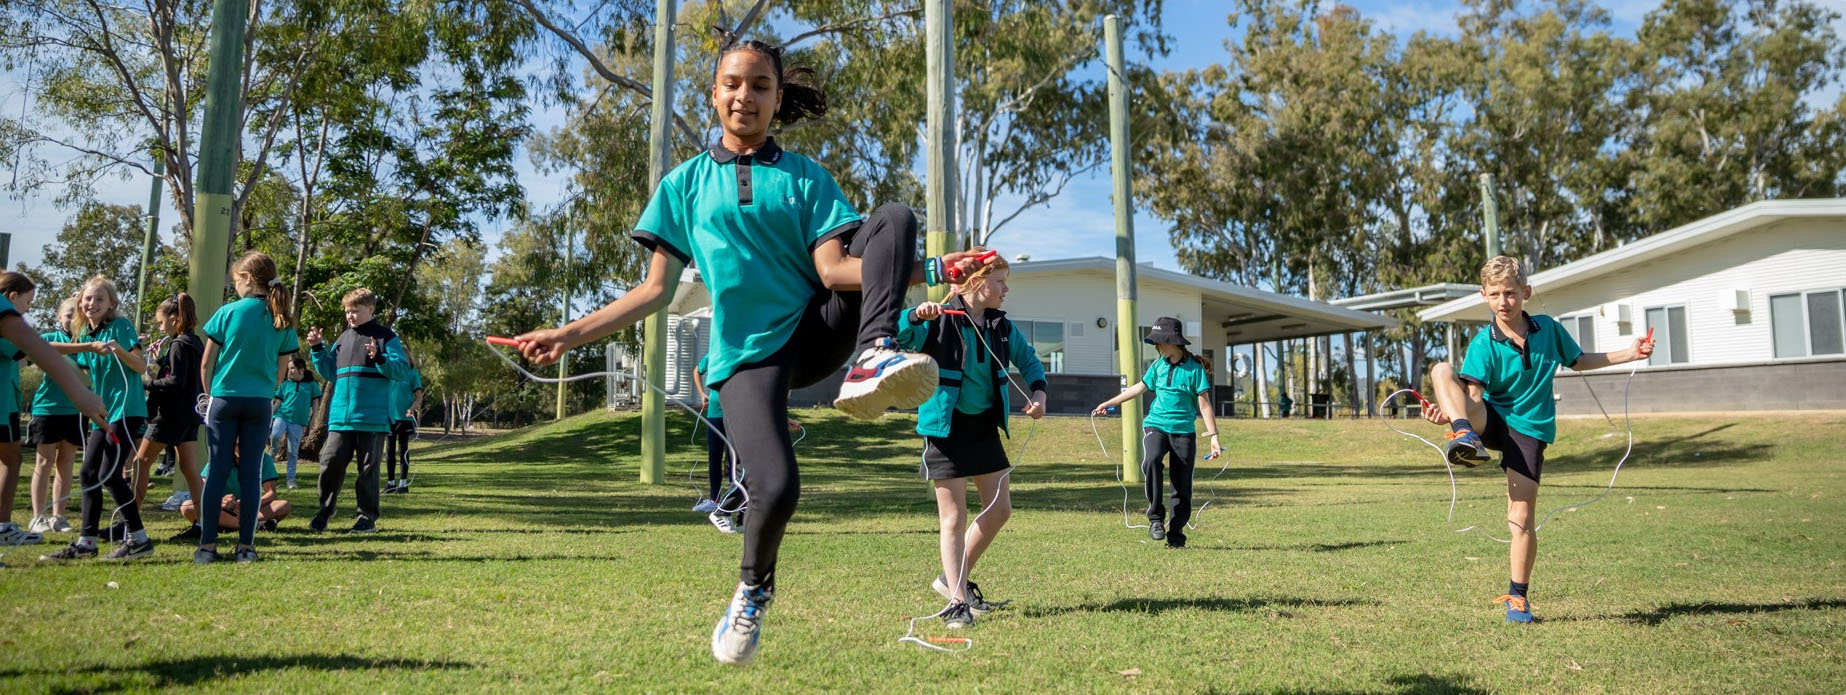 School girls skipping celebrating 40 years of Jump Rope for Heart